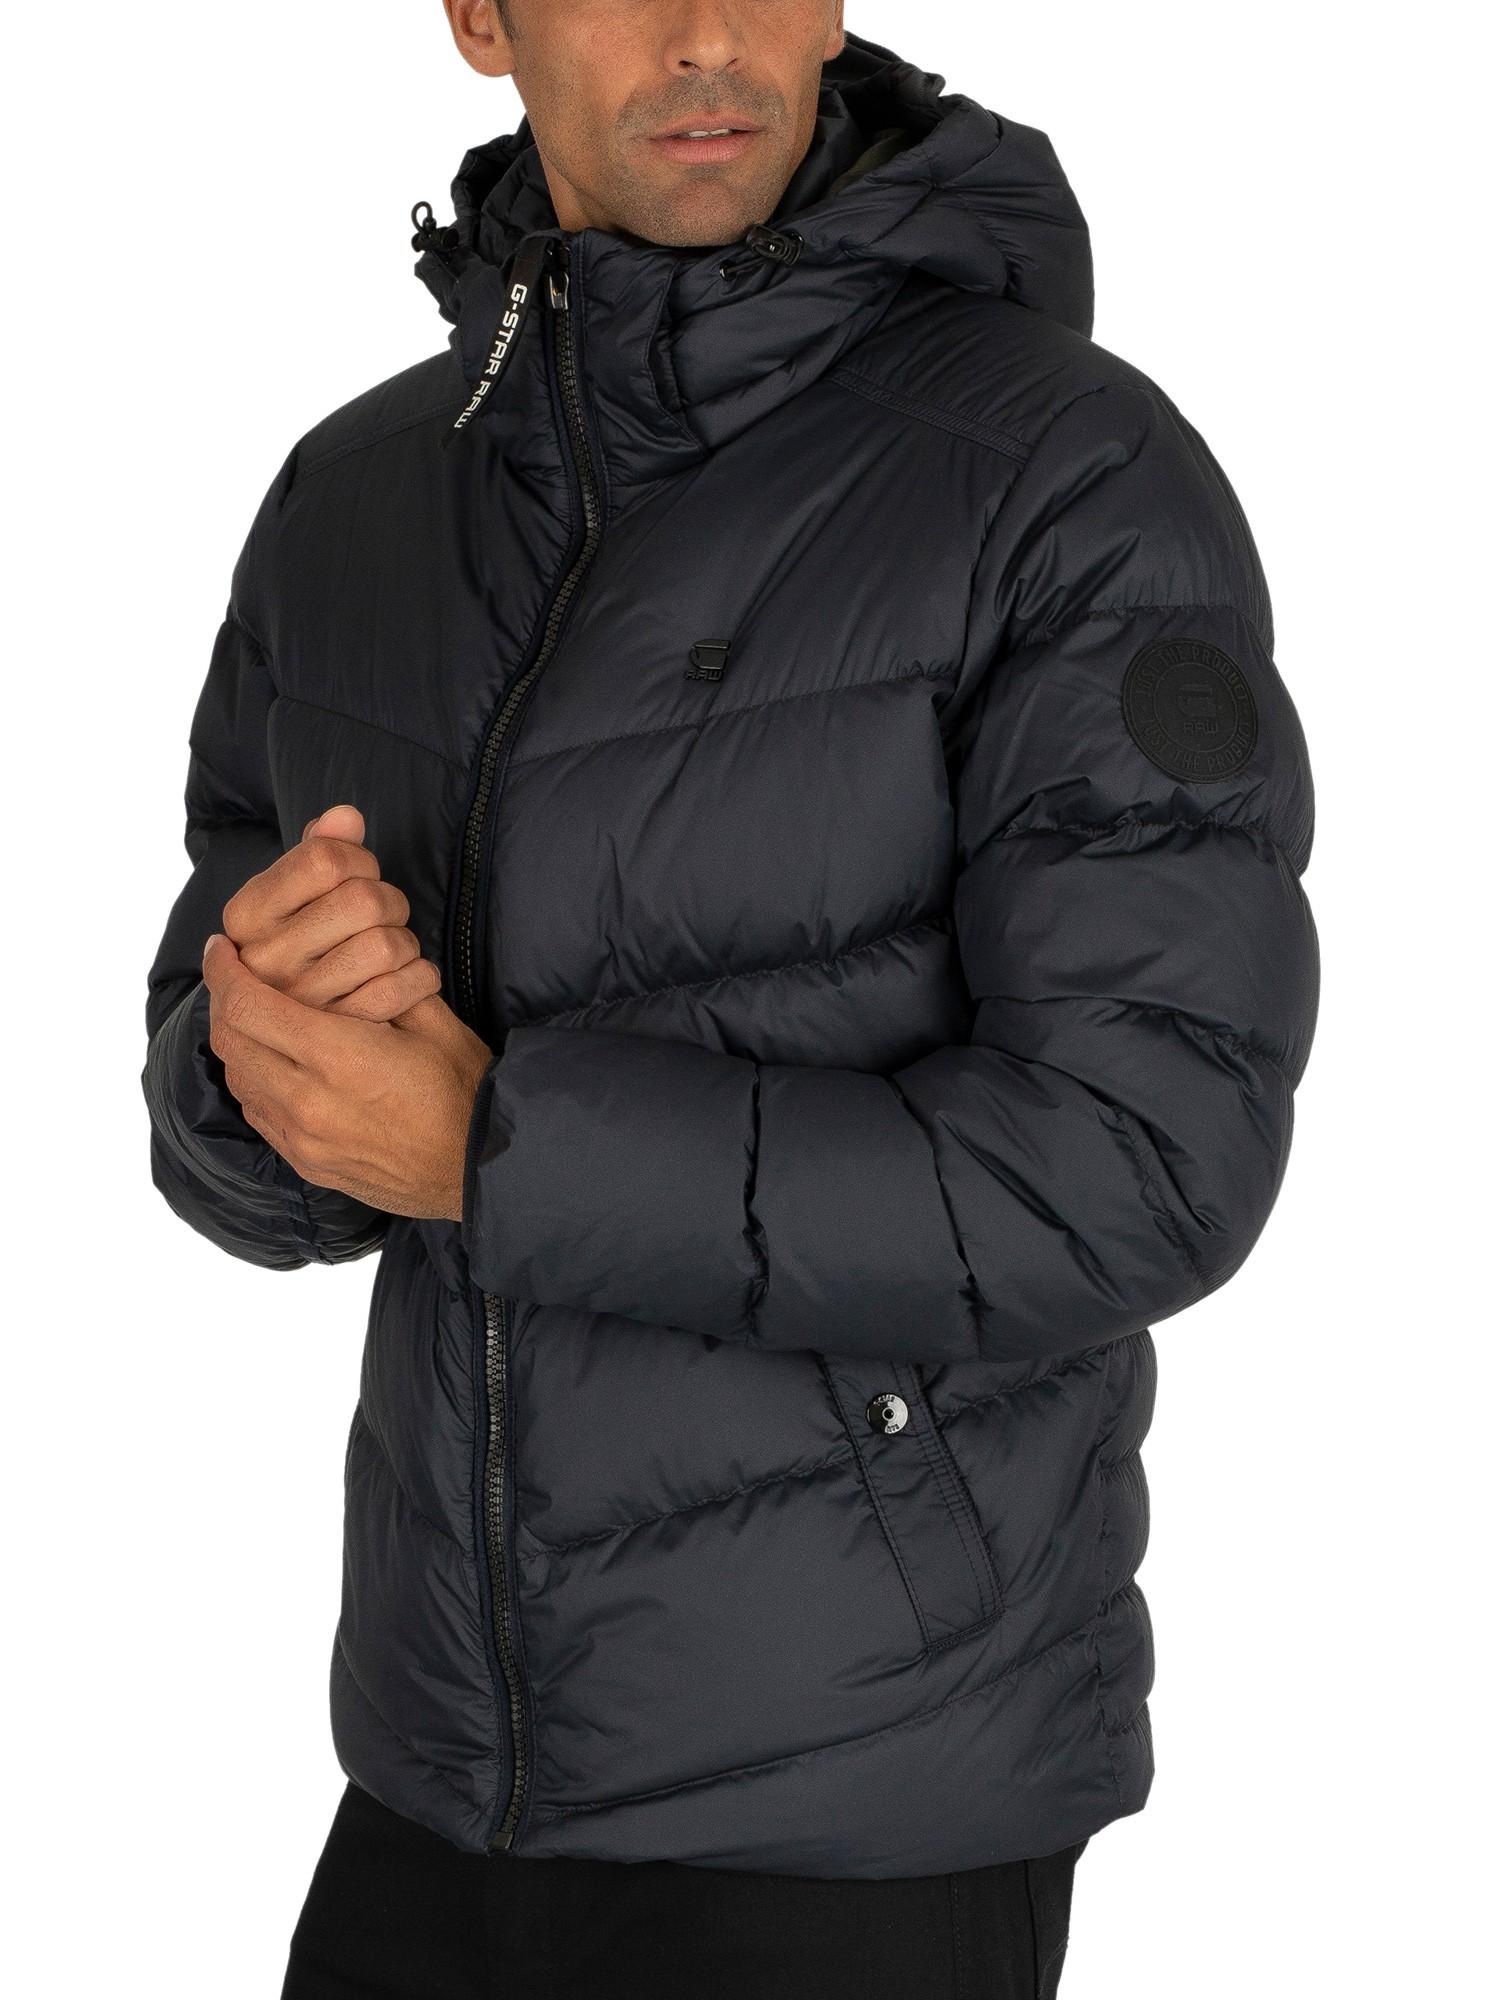 G-Star RAW Synthetic Whistler Down Puffer Jacket in Blue for Men - Lyst